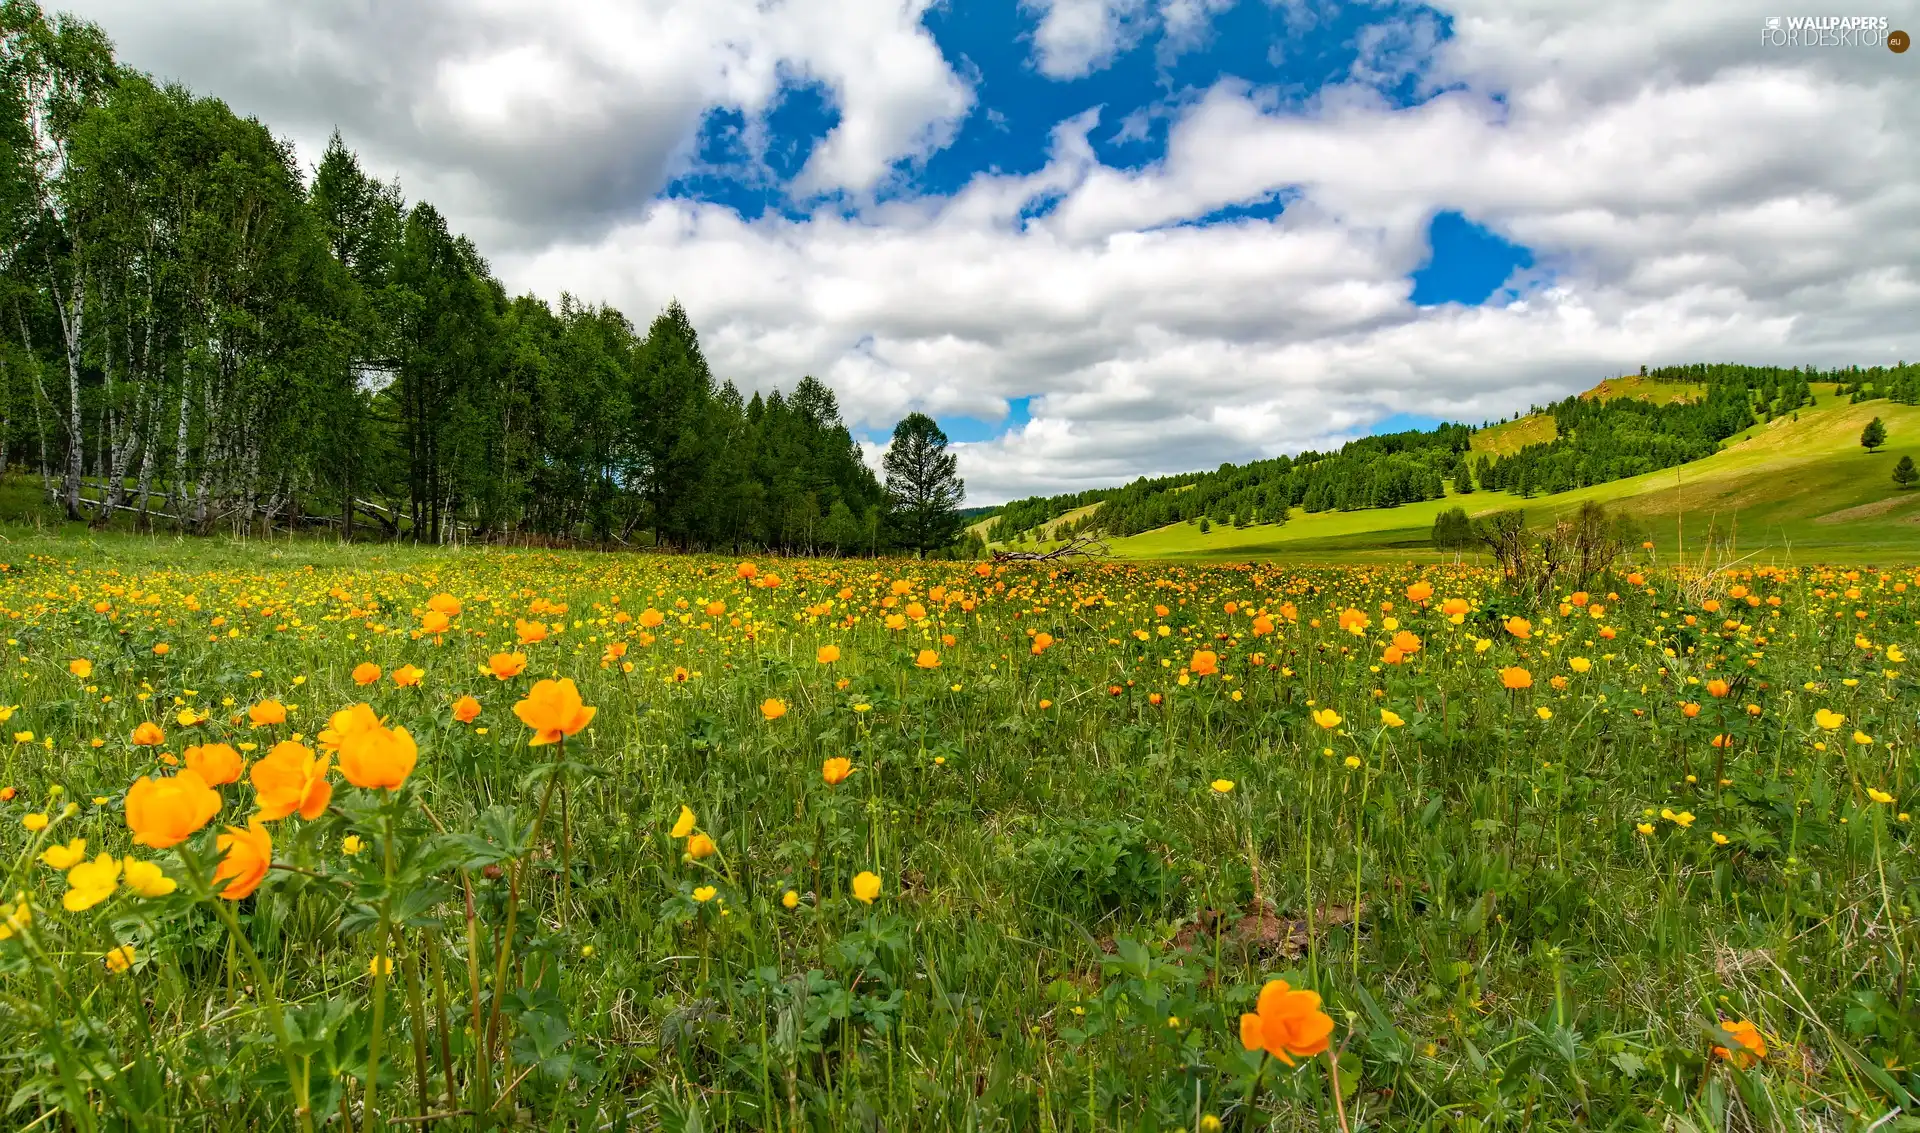 trees, The Hills, viewes, Meadow, buttercup, summer, Yellow, Flowers, Sky